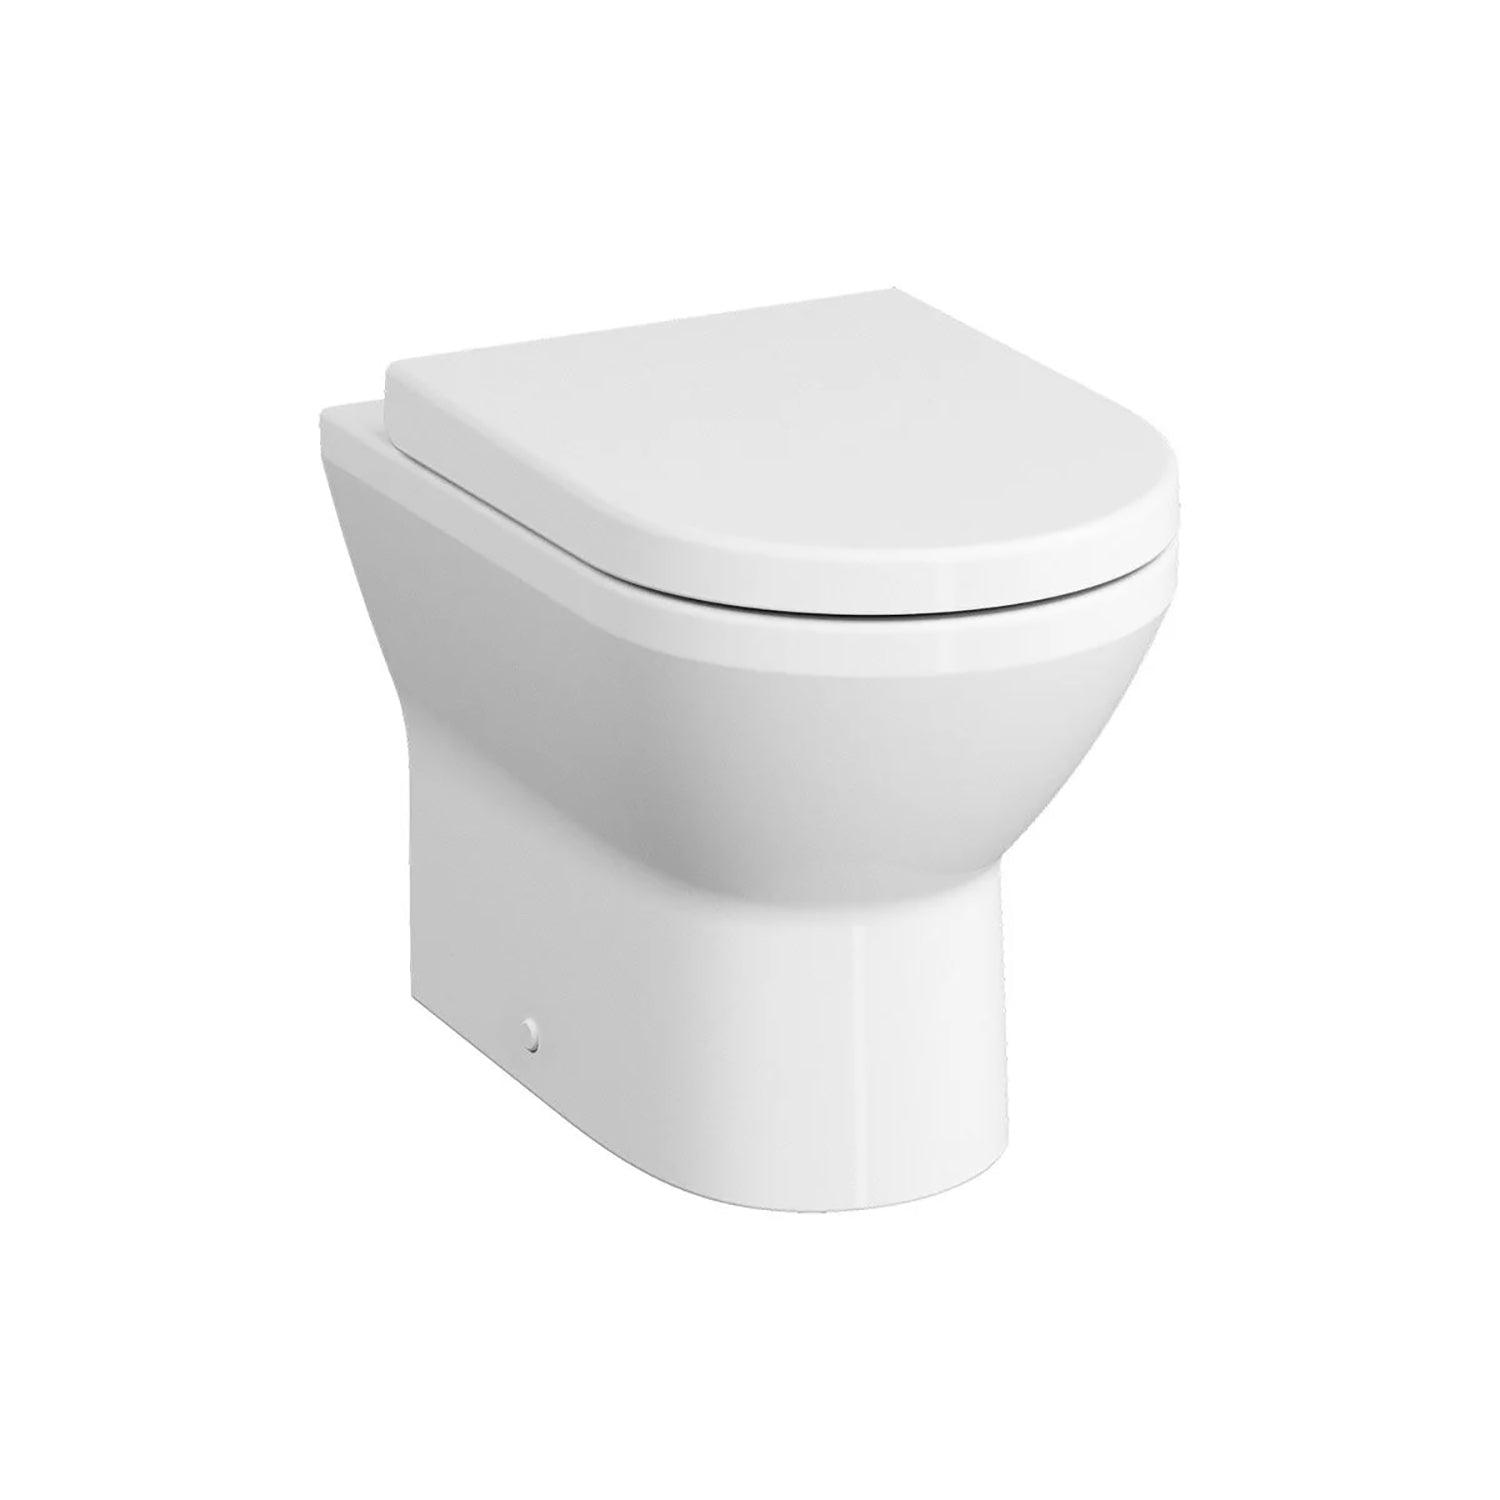 Vesta back to wall toilet in a white finish, 400mm with seat and cover not included on a white background.